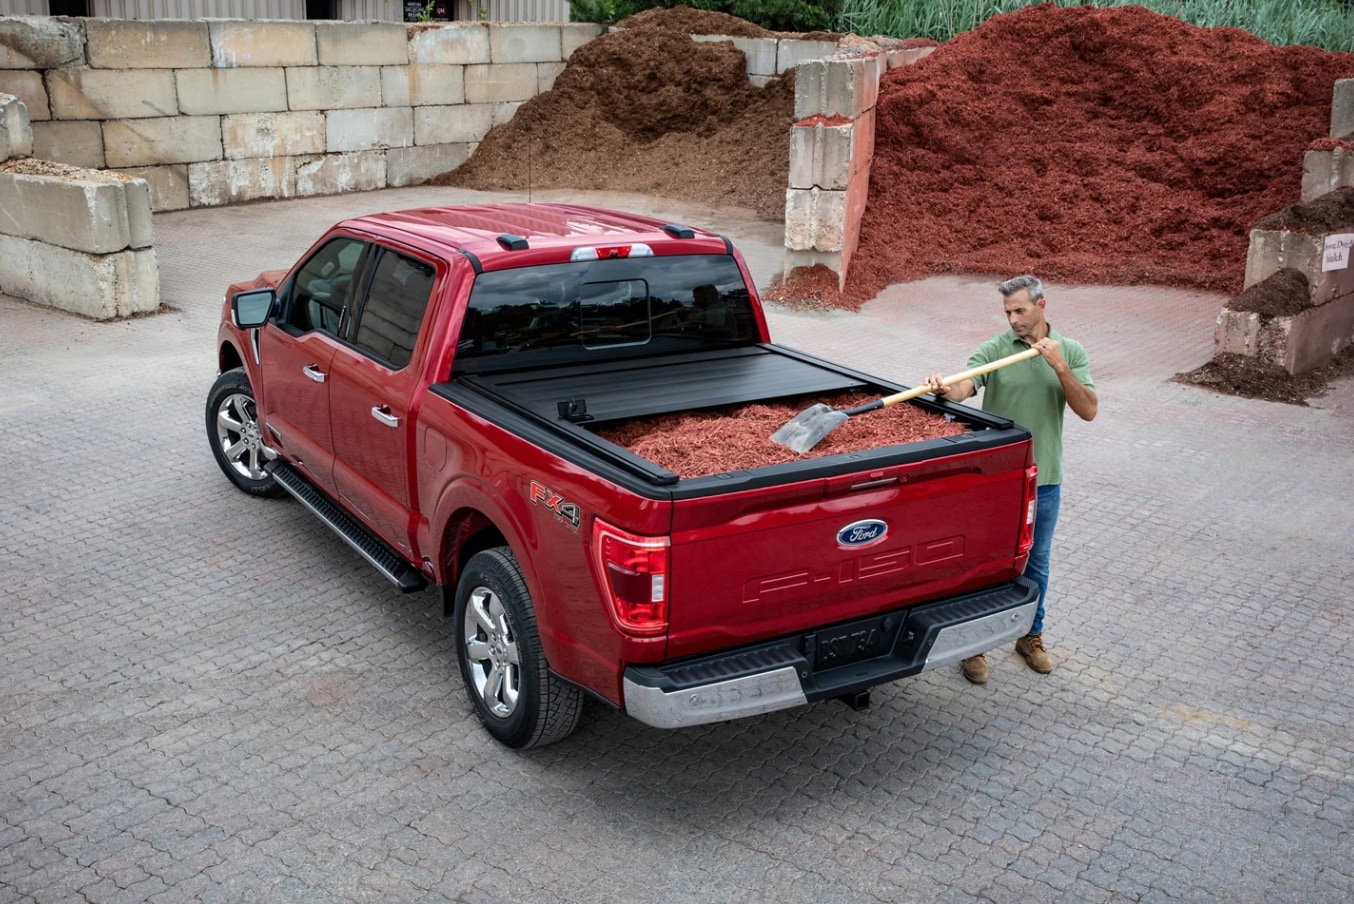 A cherry red F150 is parked at a construction site with the tonneau cover rolled back to reveal a load of mulch a man is shoveling out on the side